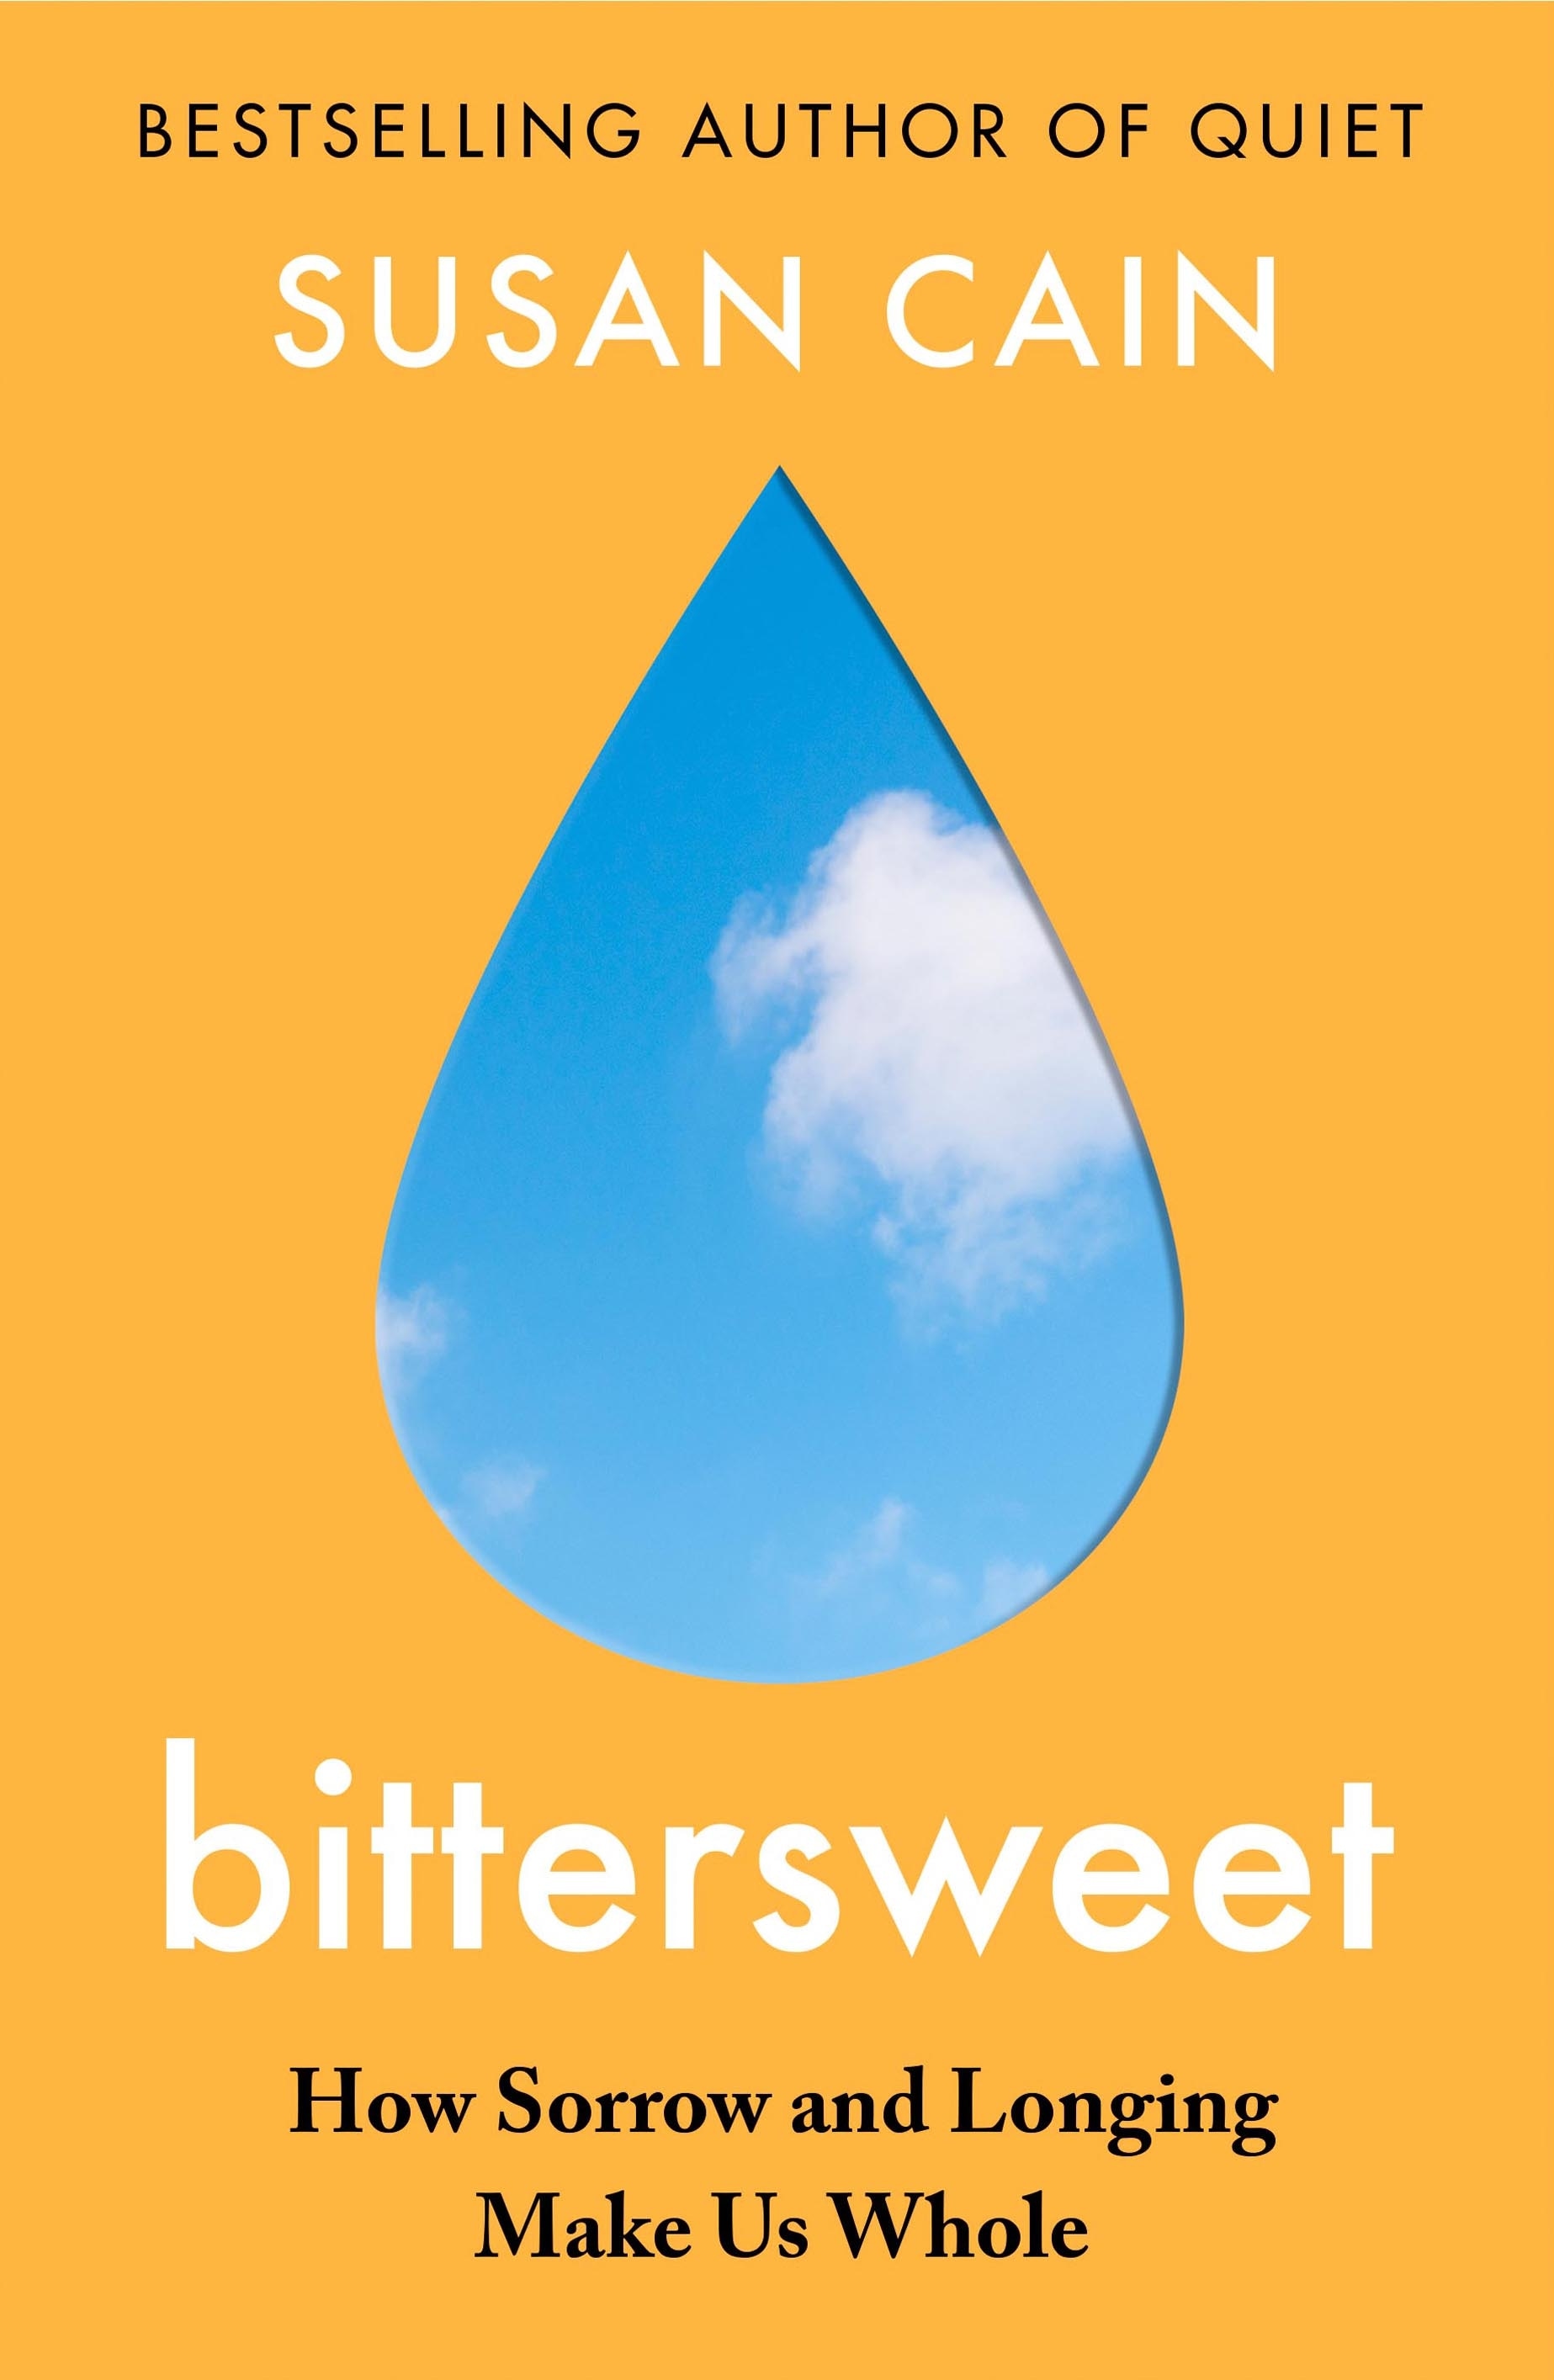 Book “Bittersweet” by Susan Cain — April 7, 2022